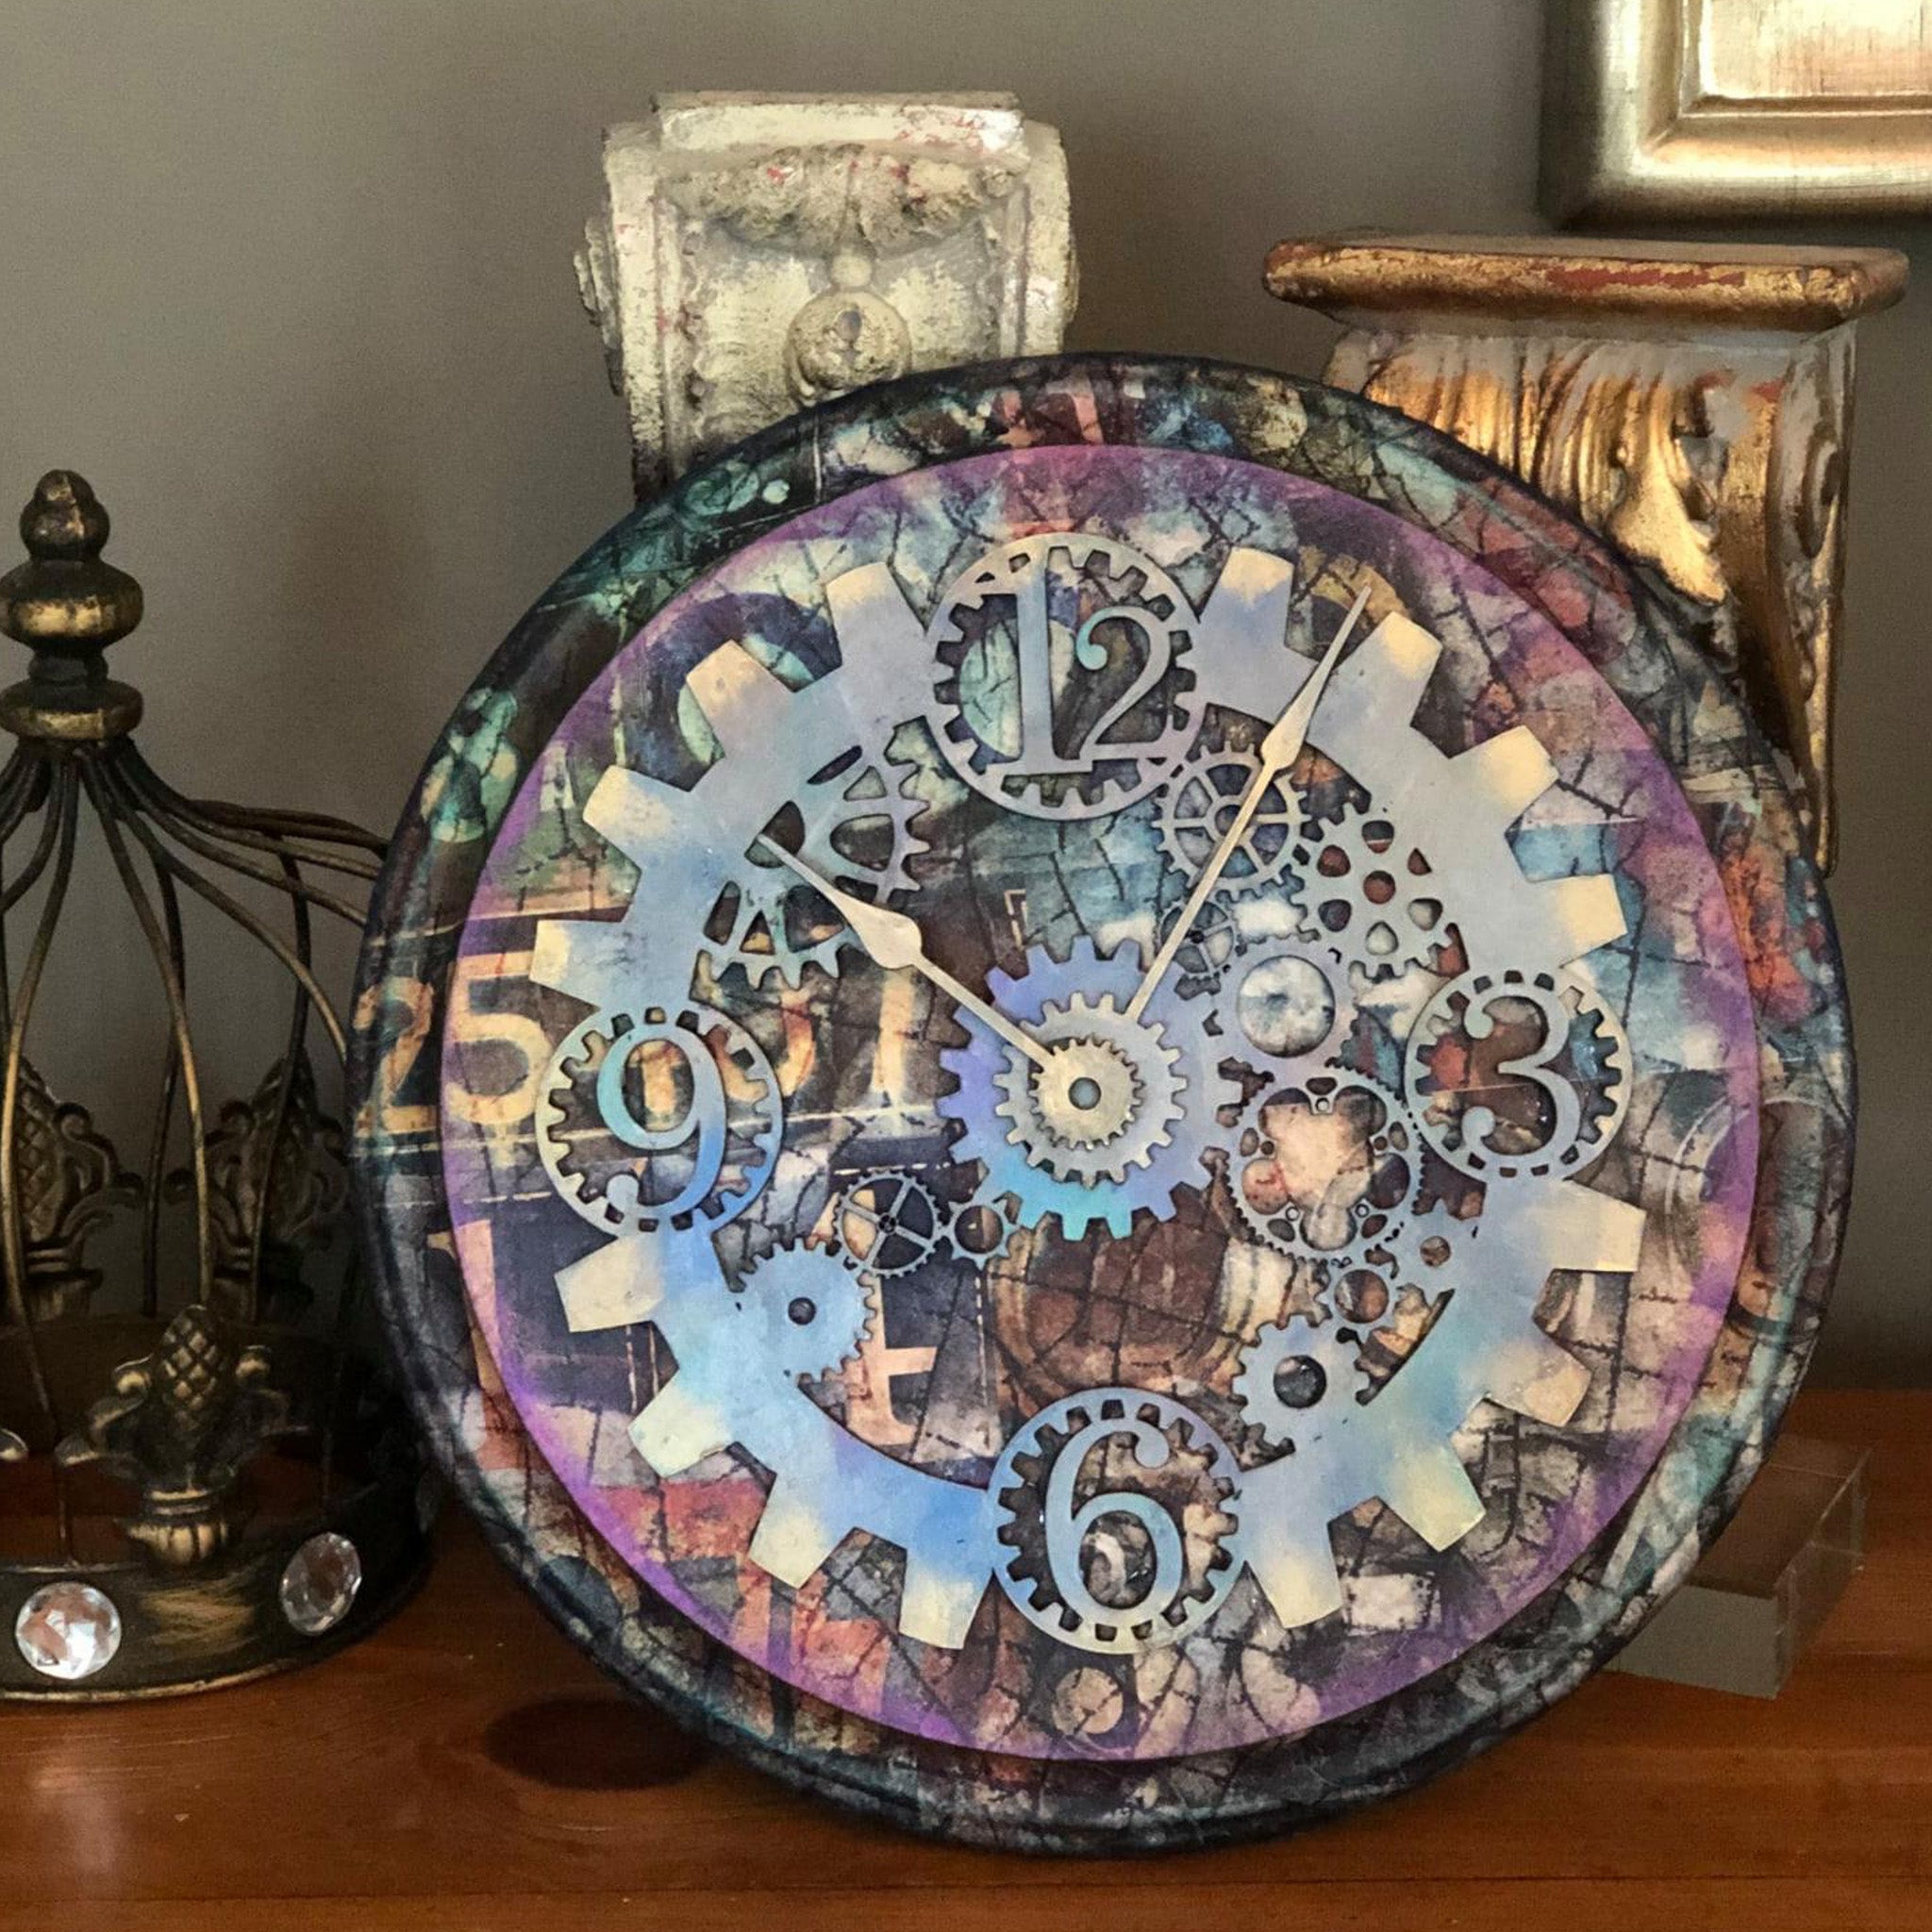 A round decor piece with the Number Mosaic decoupage paper on top.